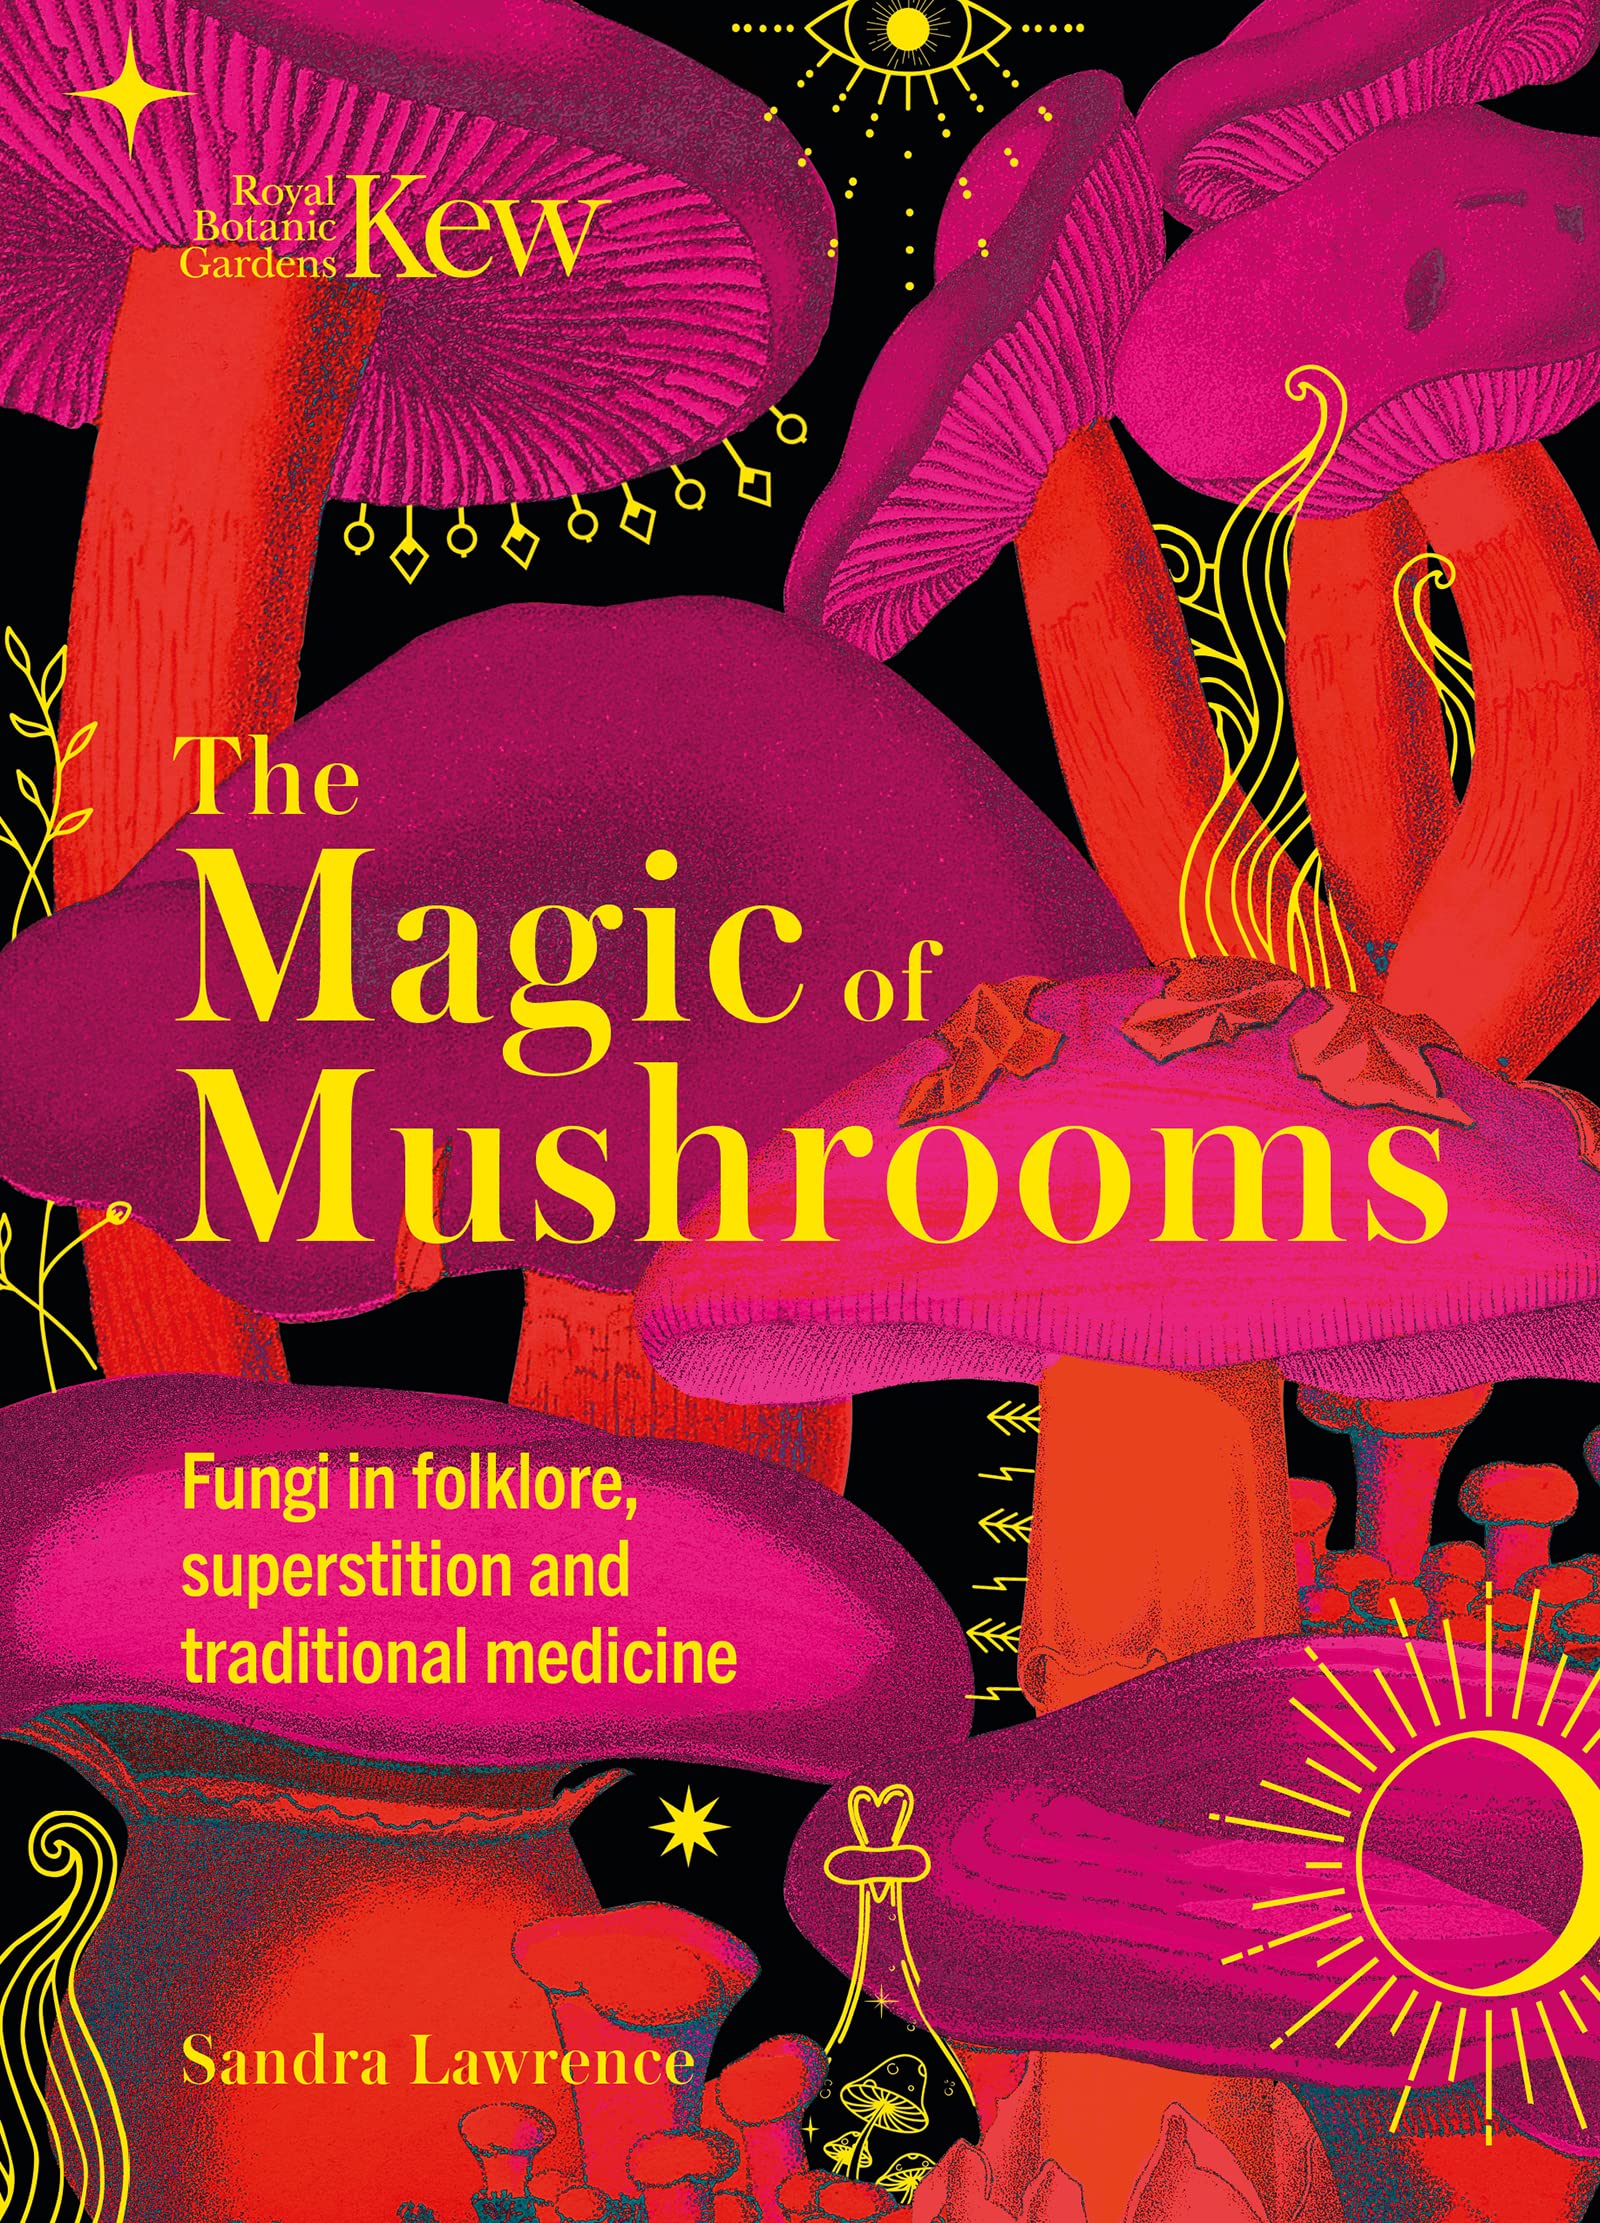 The Magic of Mushrooms: Fungi in folklore, superstition and traditional medicine (Sandra Lawrence)